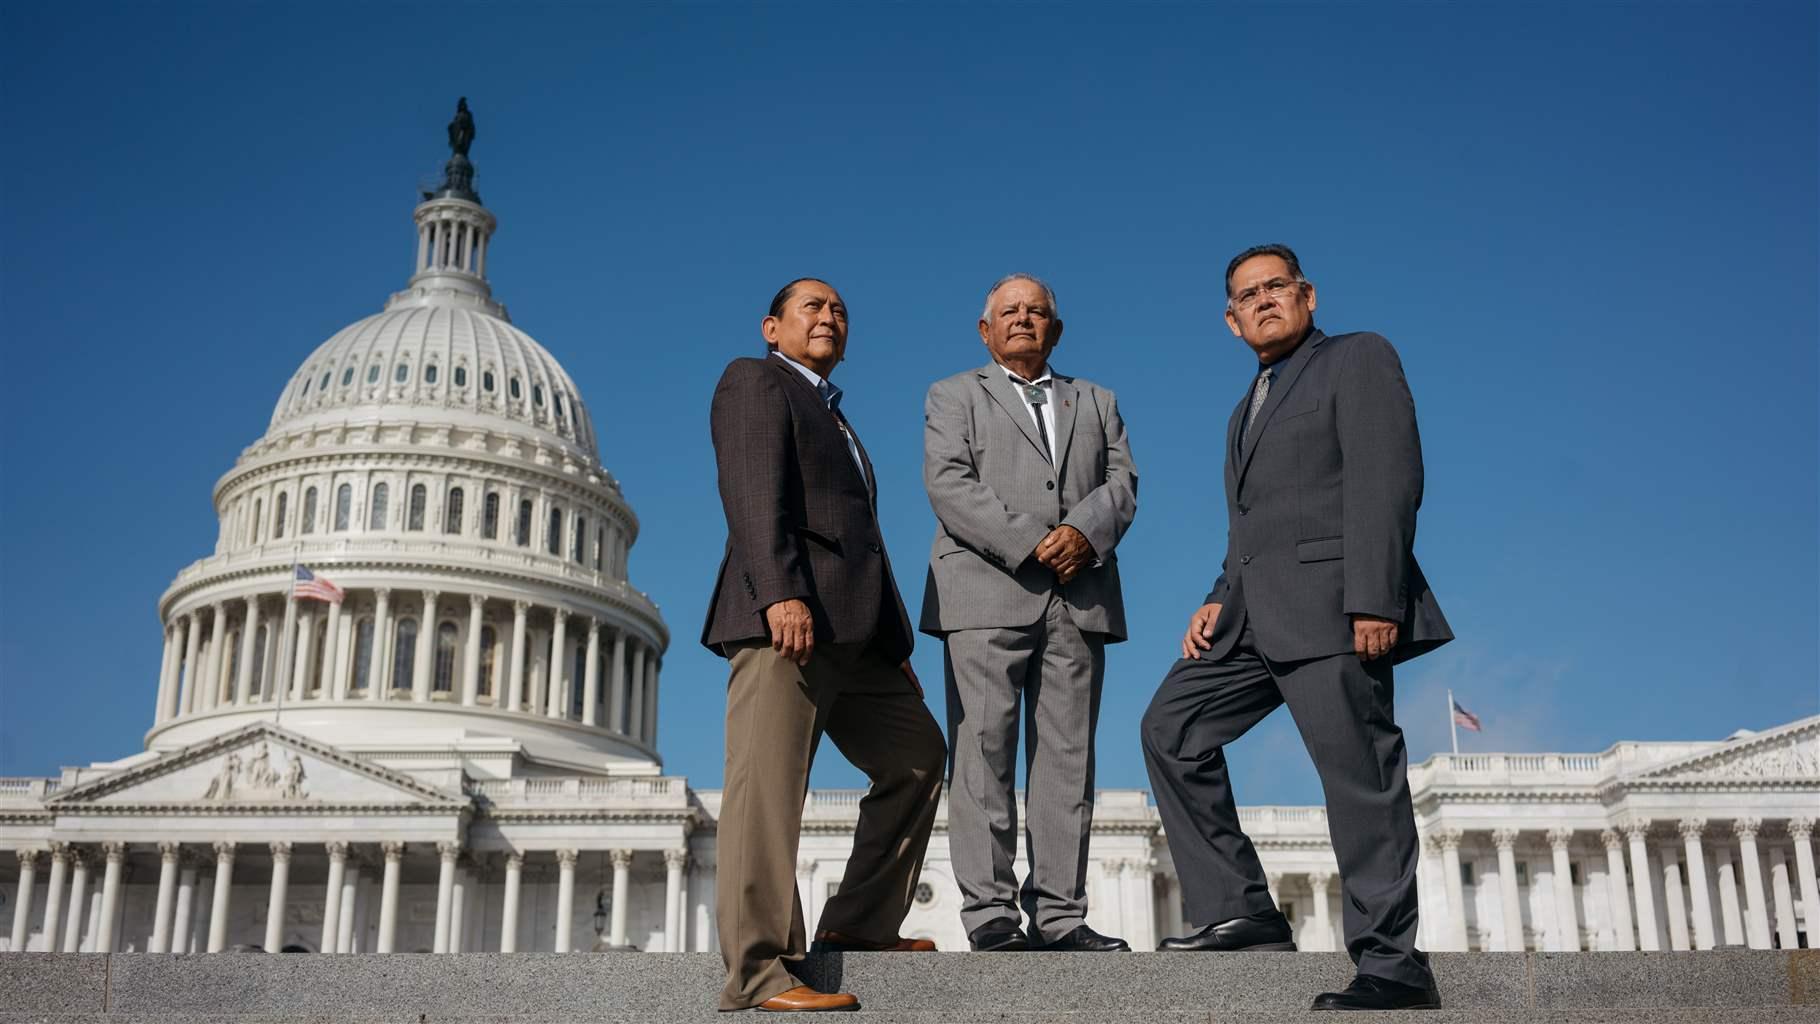 Pueblo of Acoma Governor Kurt Riley, from left, All Pueblo Council of Governors Chairman Paul Torres, Former Pueblo of Tesuque Governor Mark Mitchell and Acoma Pueblo member Keegan King in front of the United States Capitol on Sept. 26, 2018.